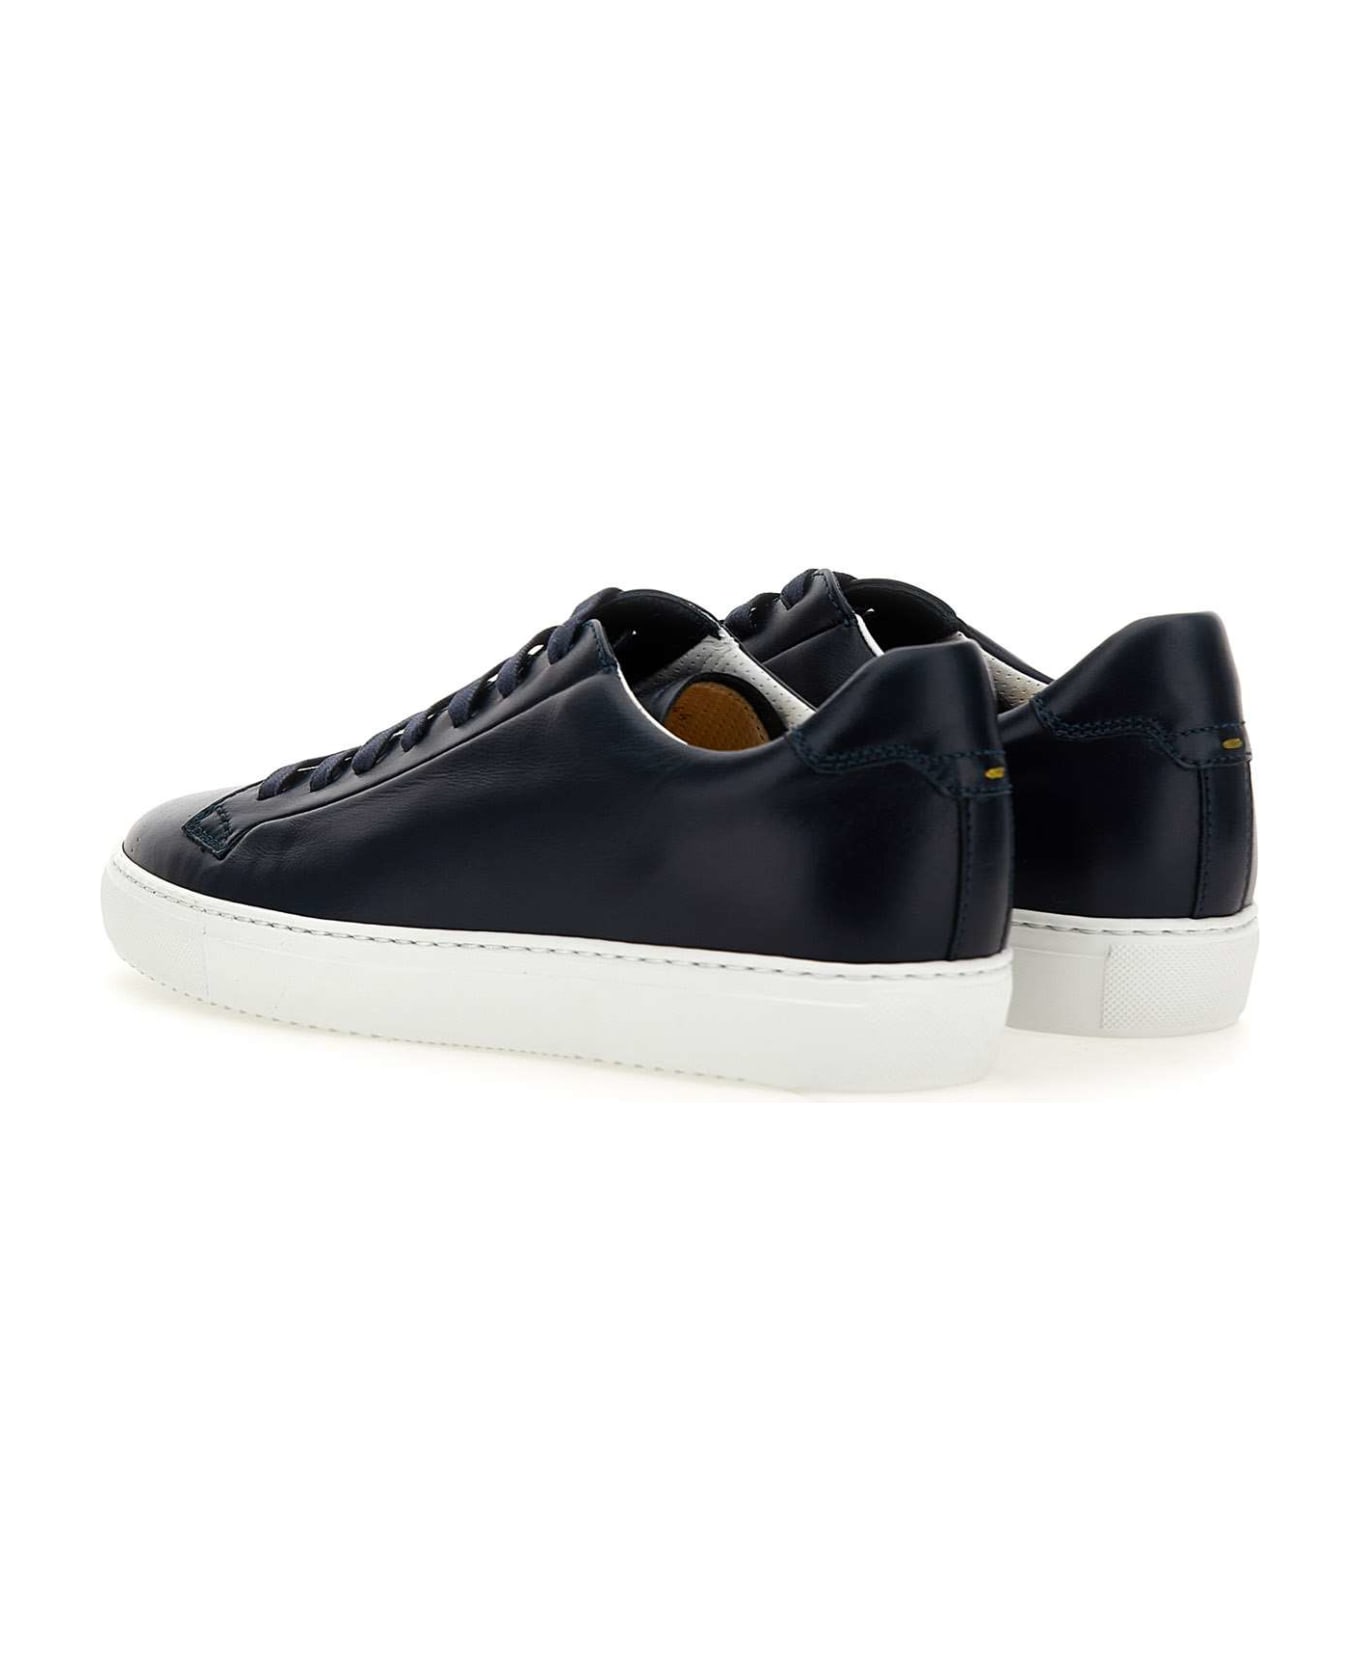 Doucal's "chiffon" Leather Sneakers - BLUE